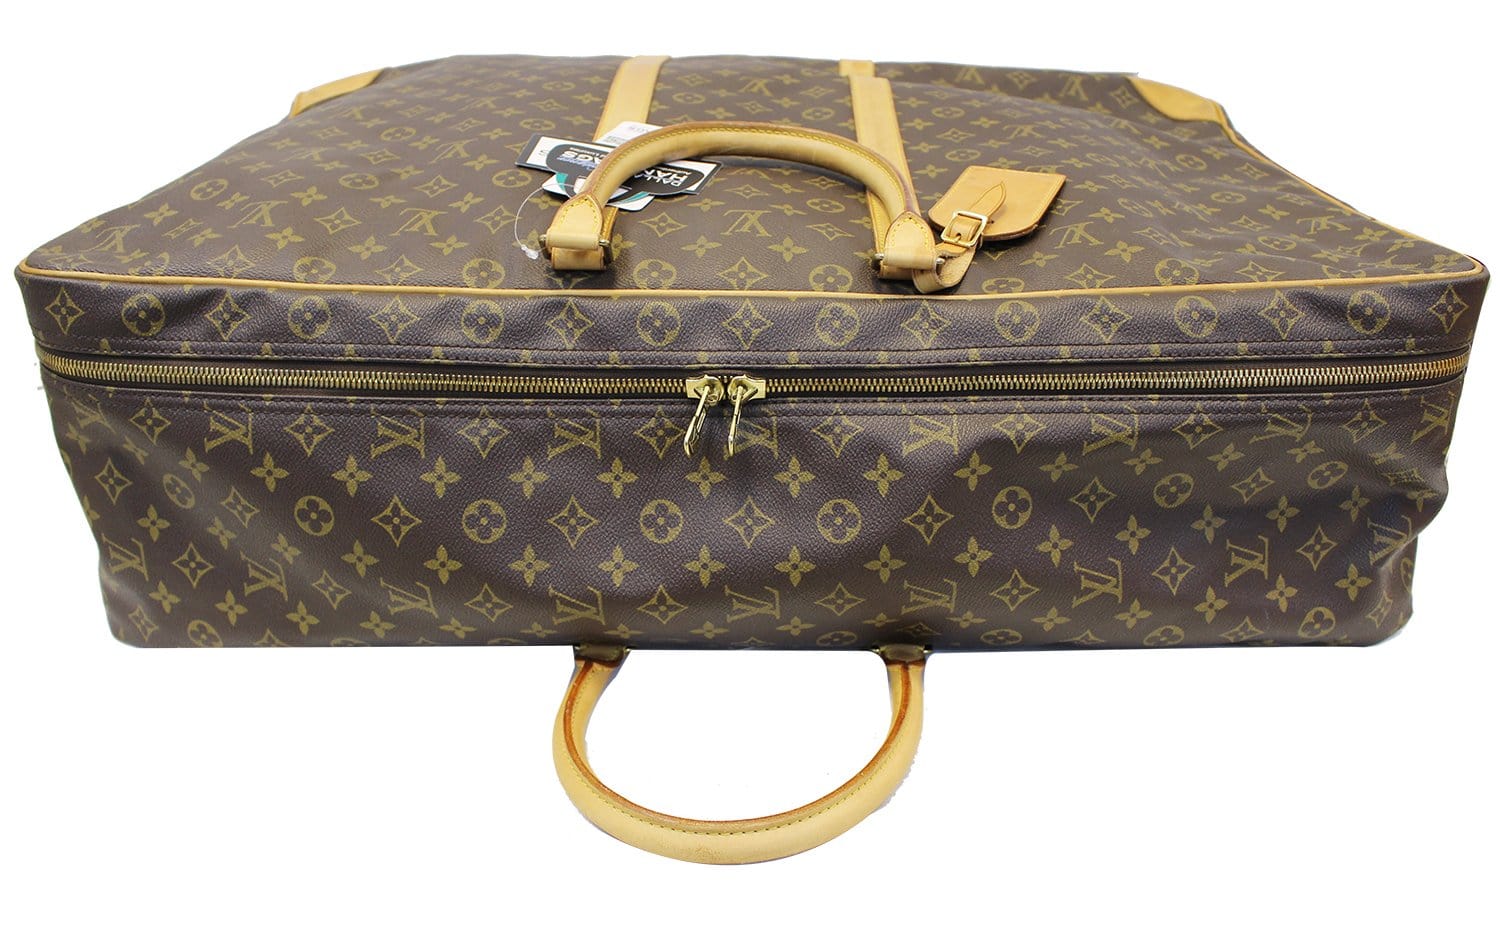 Vintage Designer Louis Vuitton Softside Brown Leather Suitcase Luggafe  Having A Classic Monogram Auction